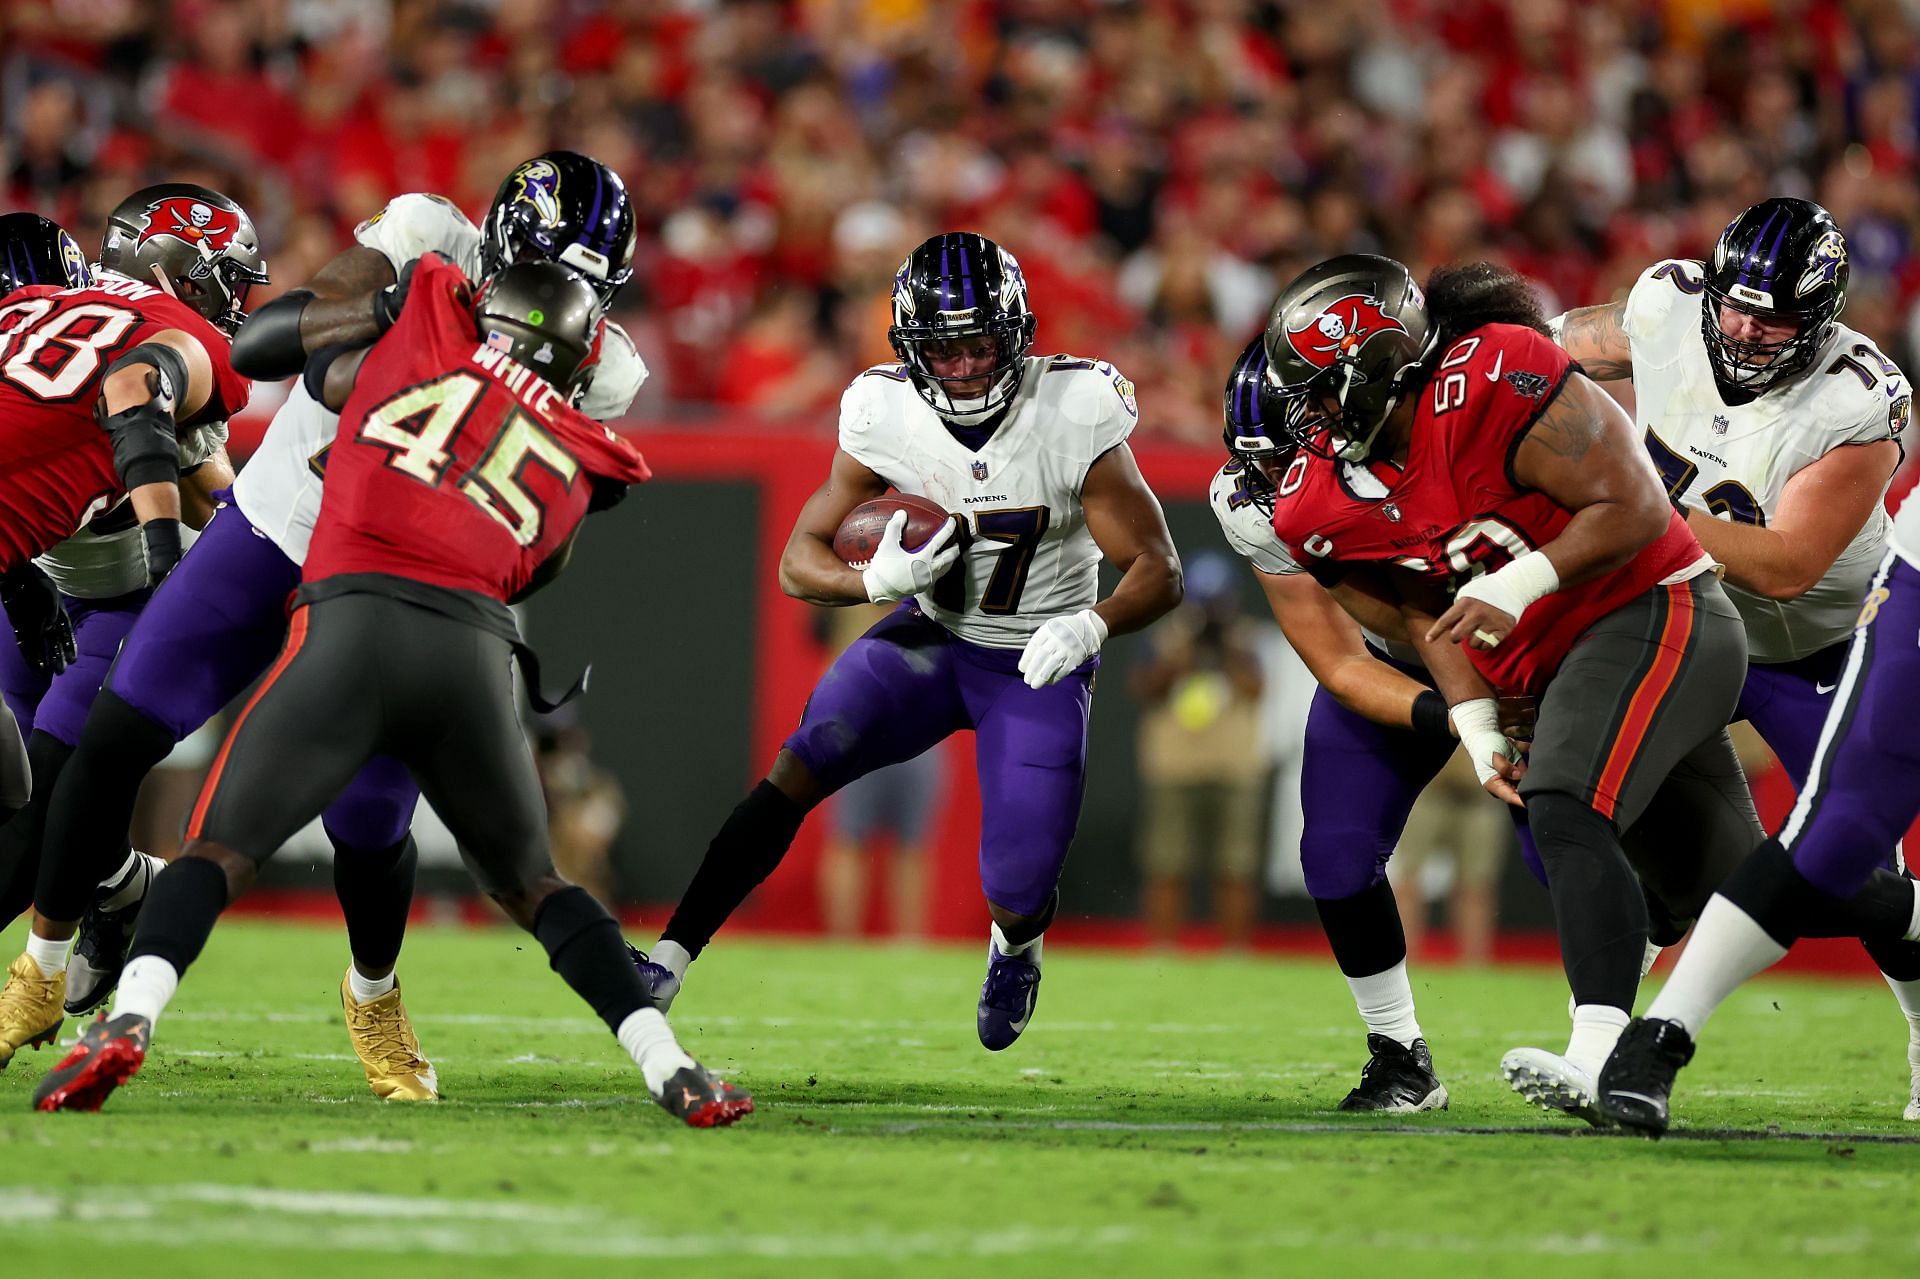 Baltimore forced errors out of Tampa Bay to win 27-22.